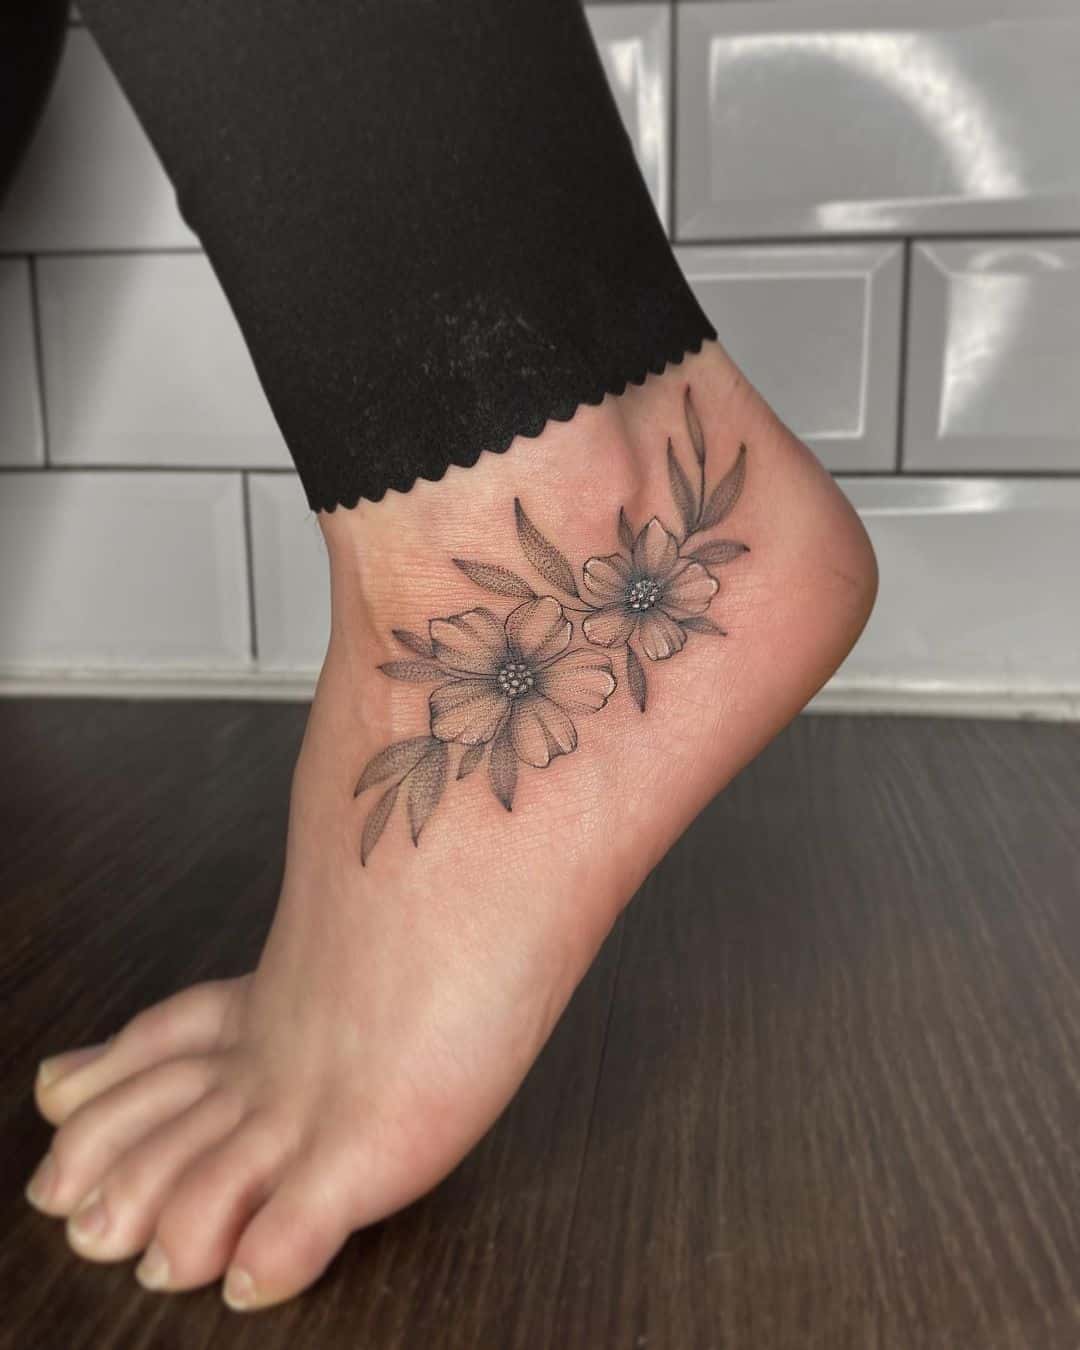 Fine line cherry blossom tattoo done on the ankle.